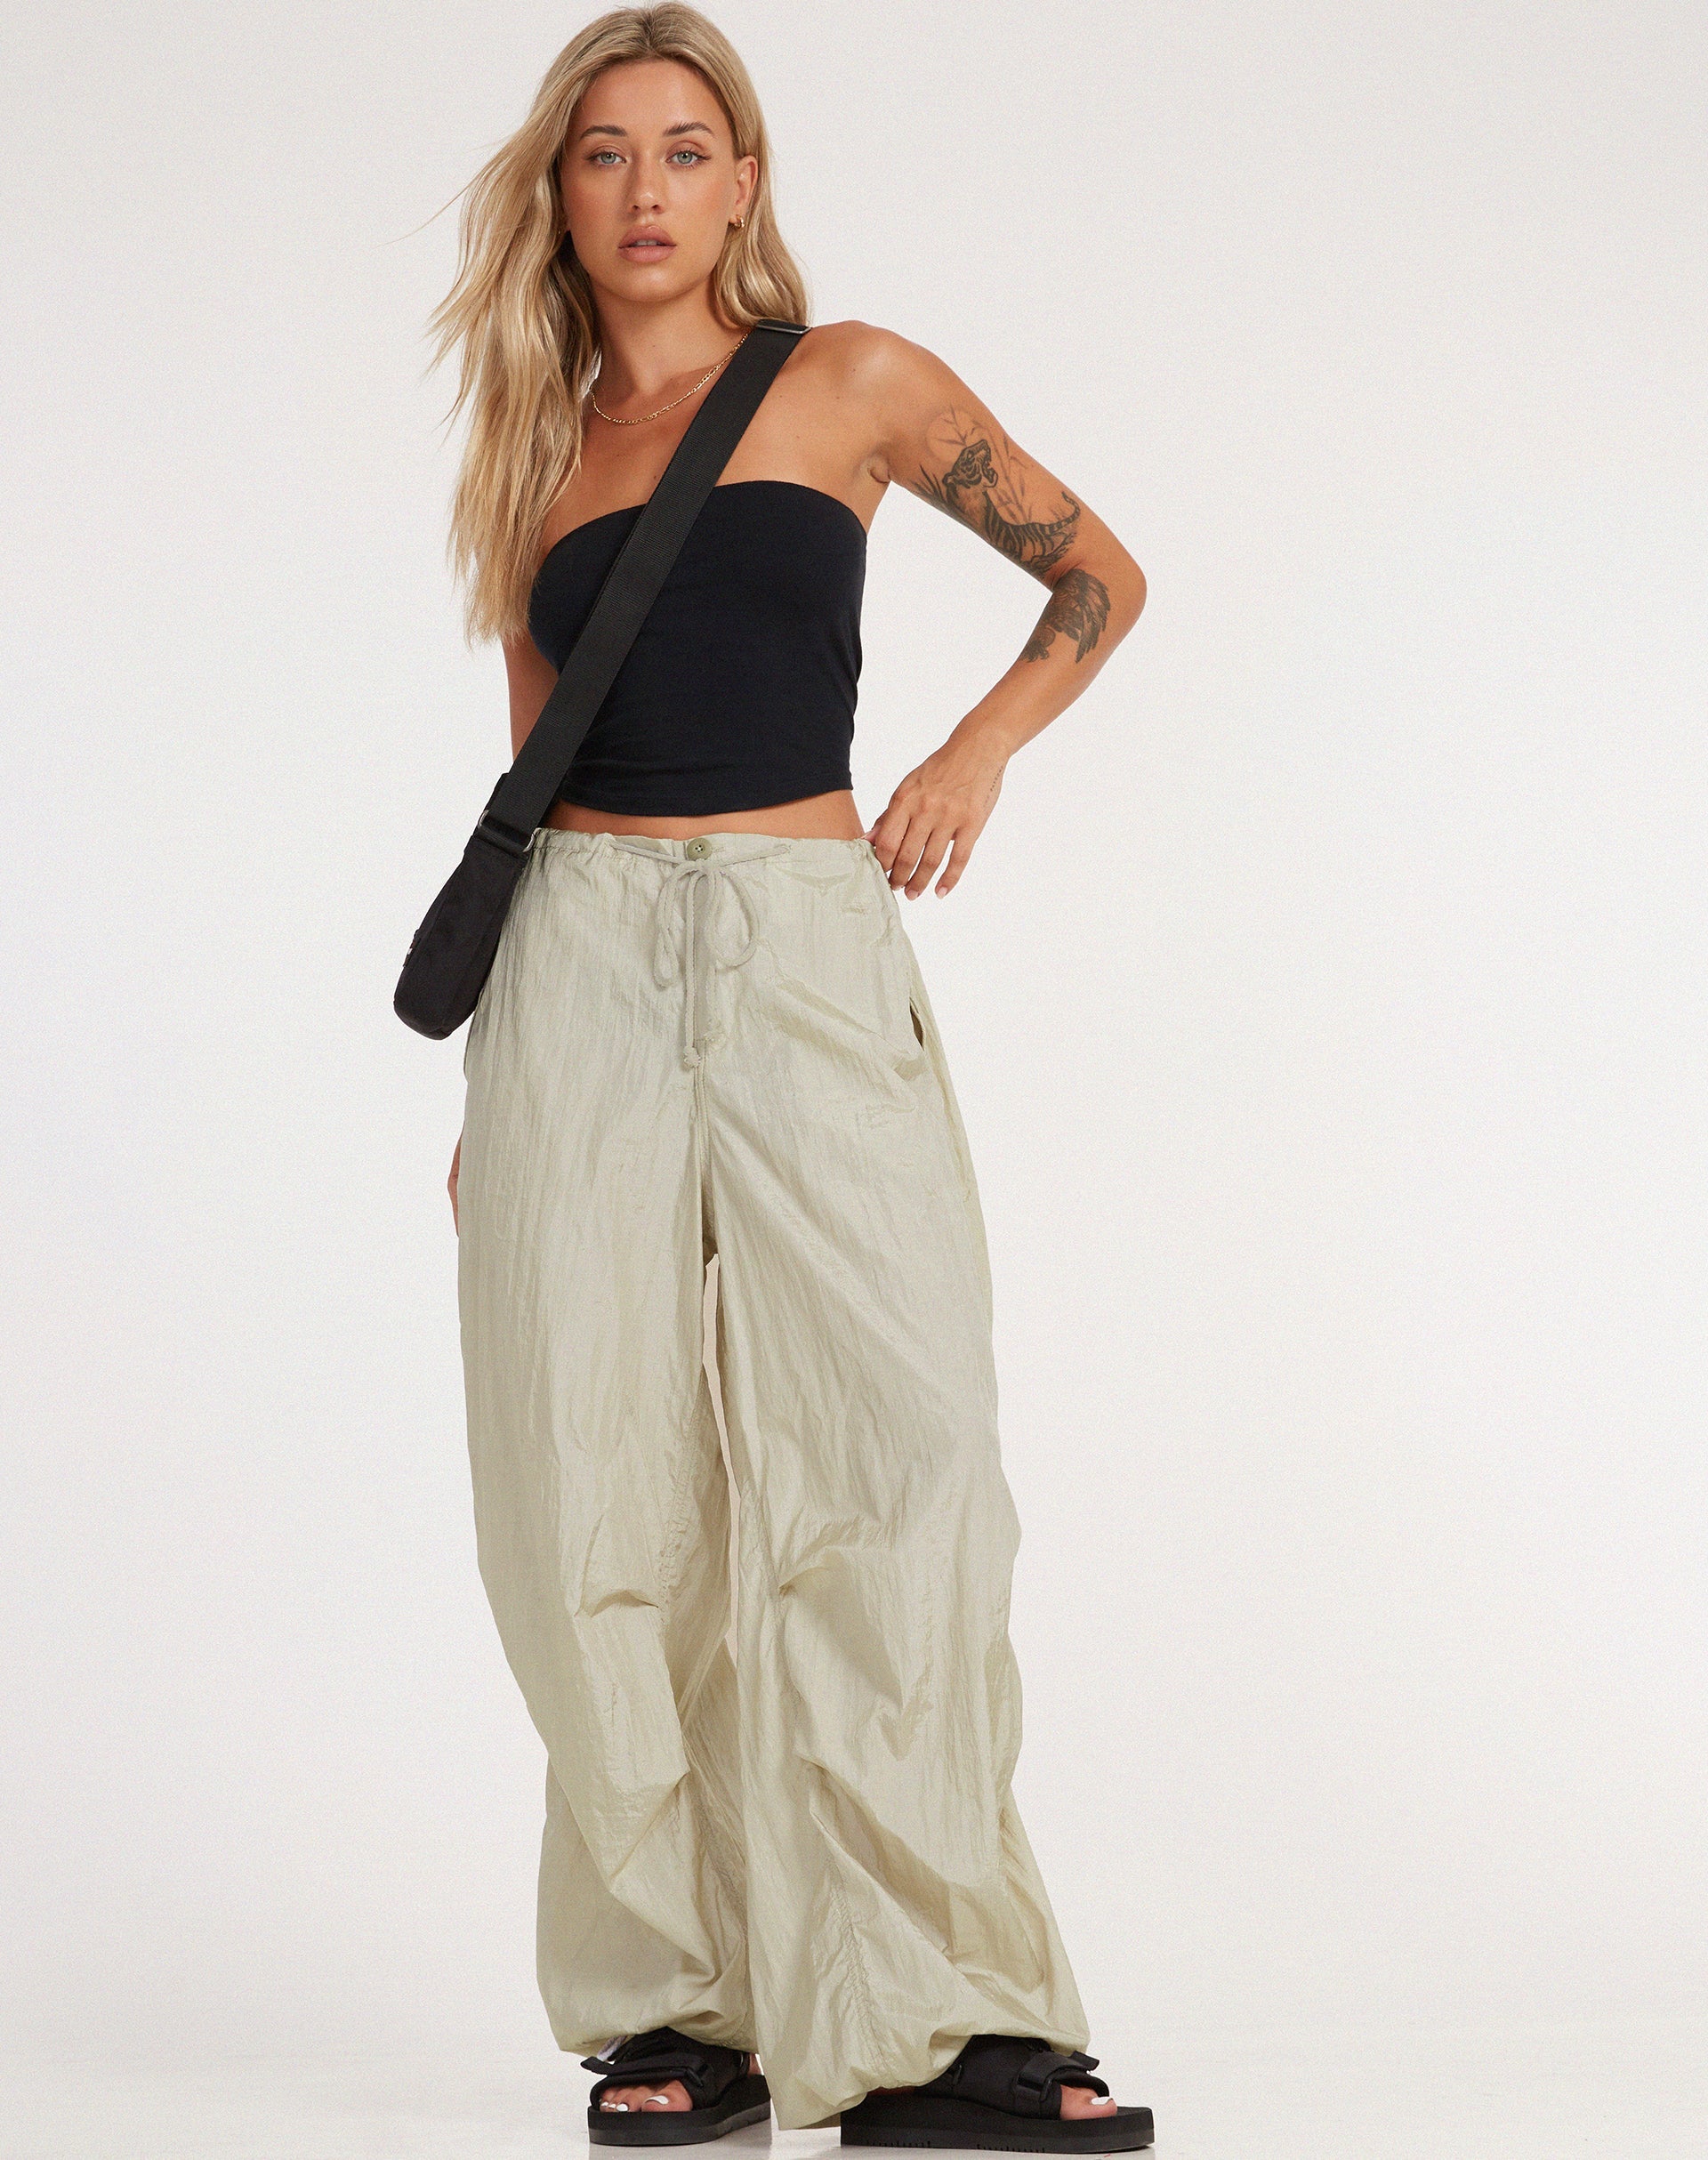 Image of Chute Trouser in Parachute Almond Milk